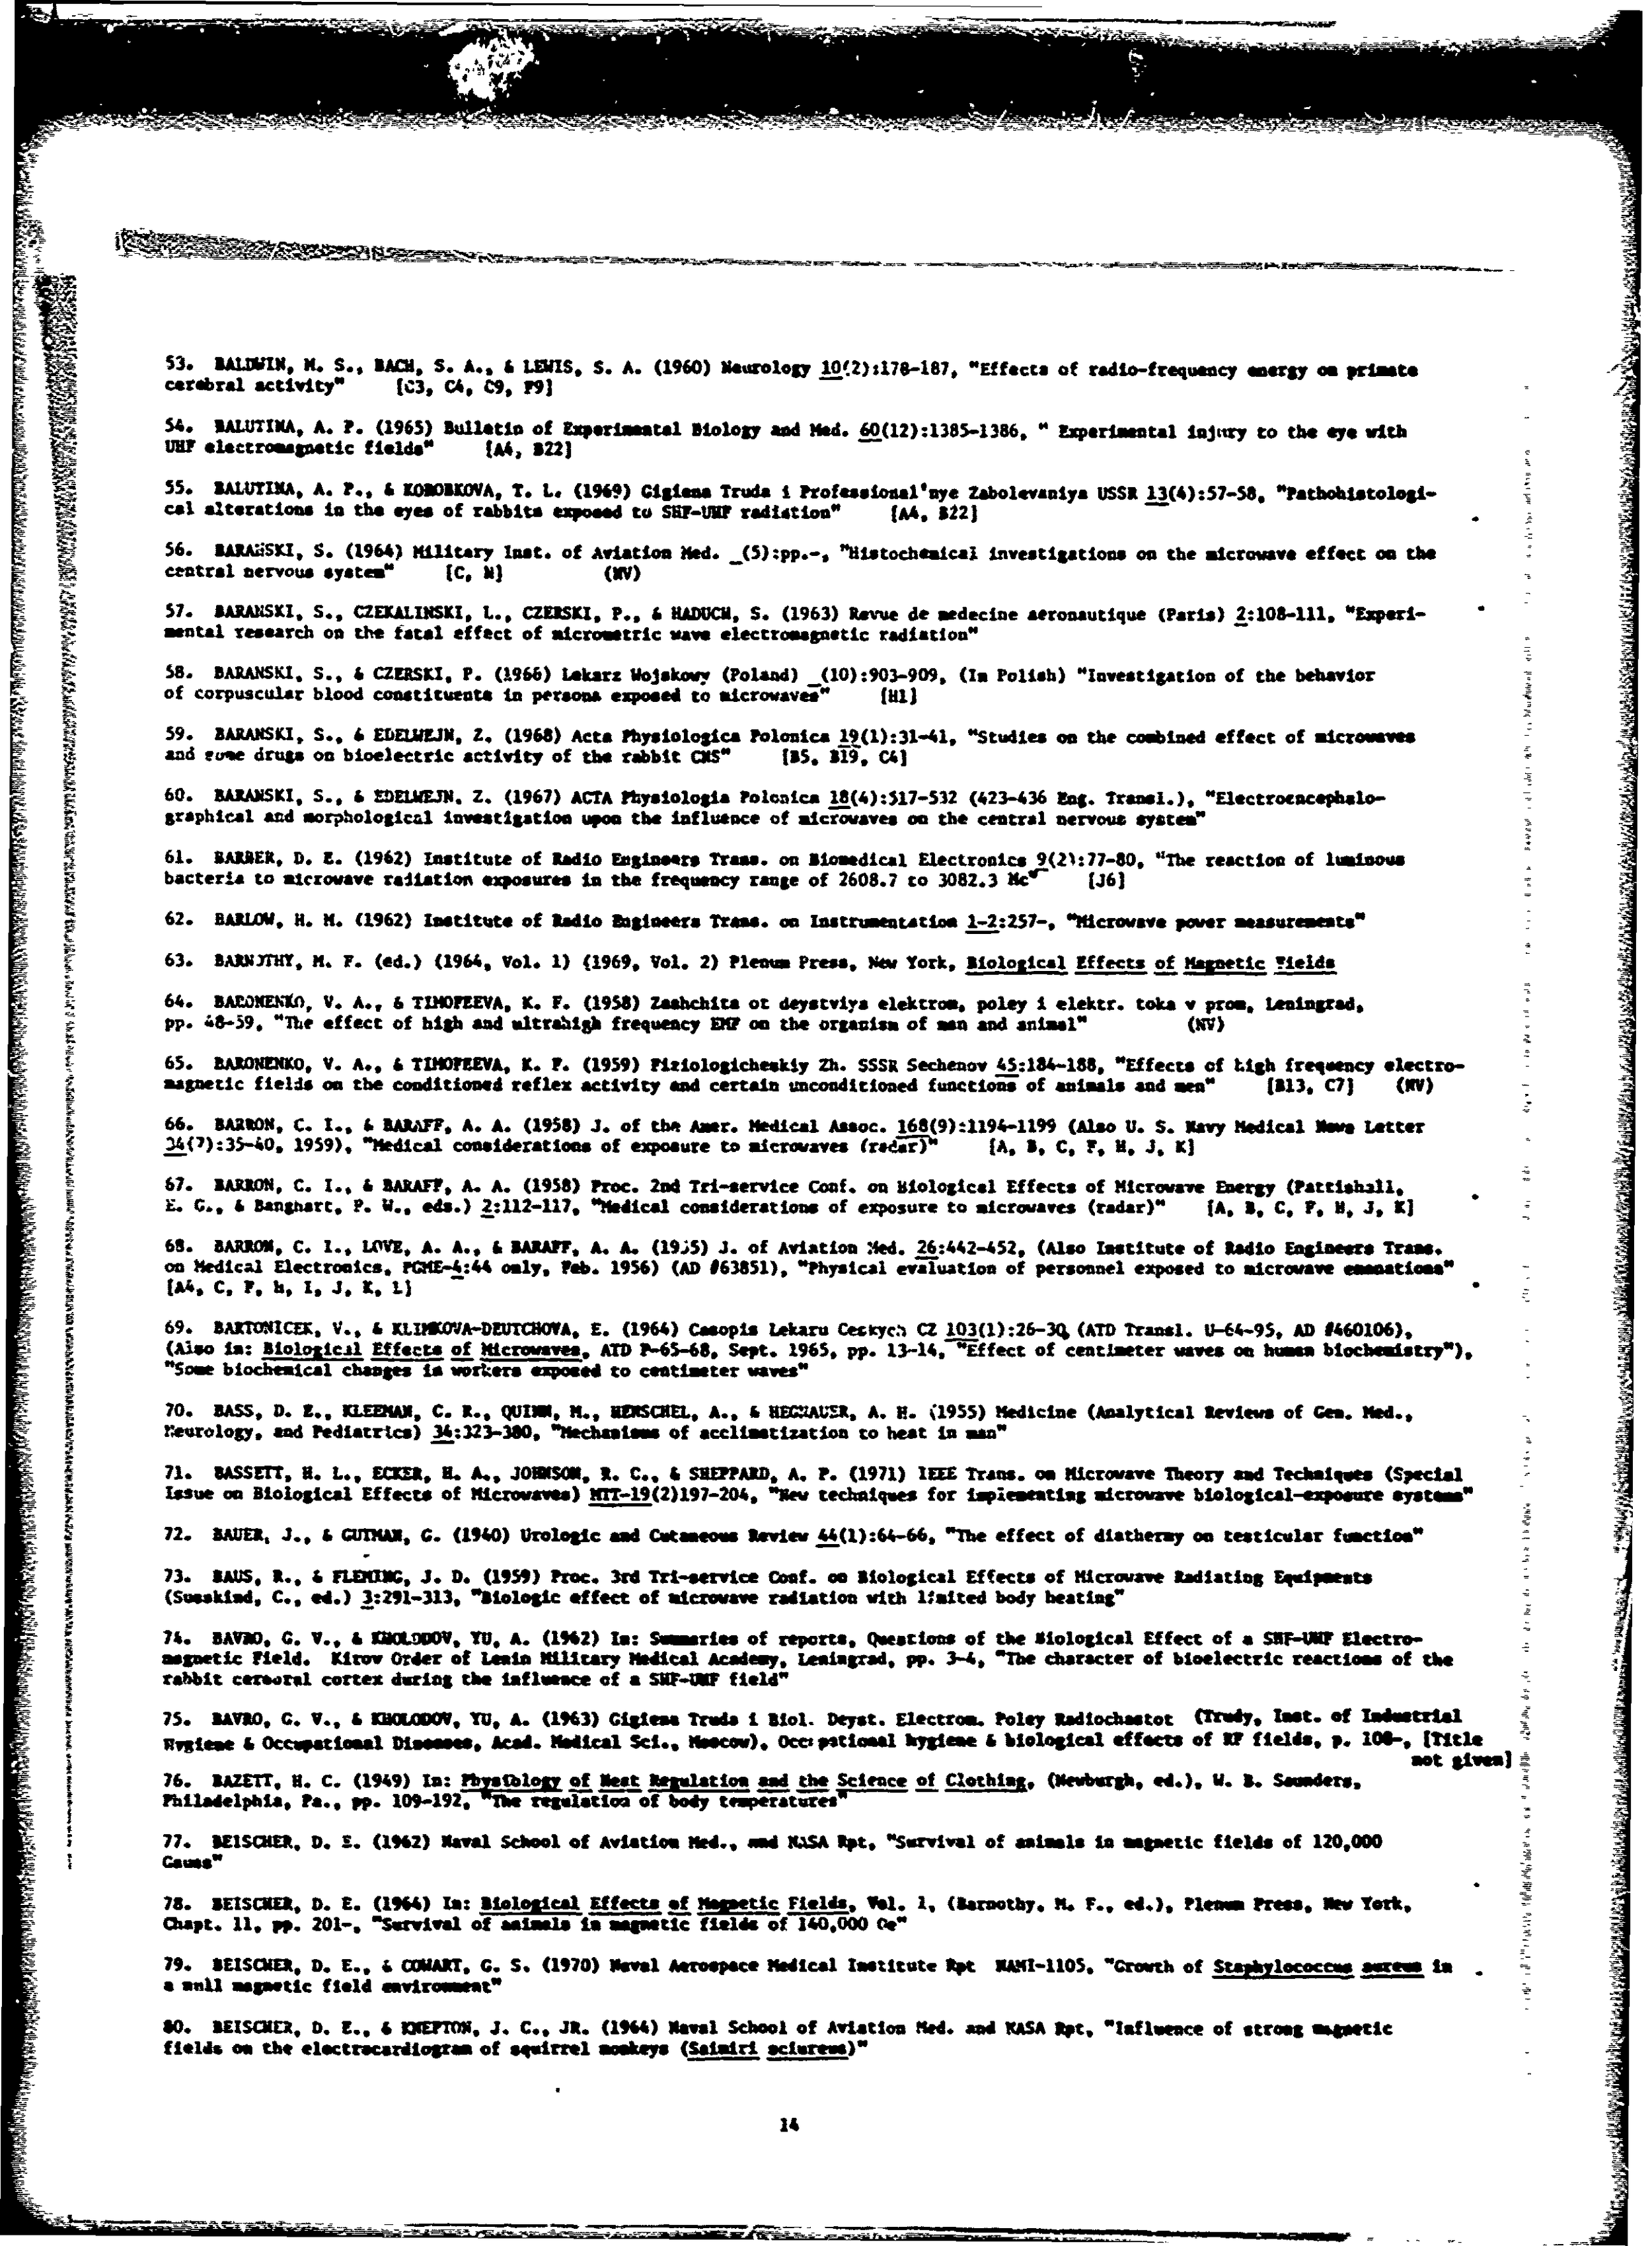 BIBLIOGRAPHY_OF_REPORTED_BIOLOGICAL_PHENOMENA_'EFFECTS'_AND_CLINICAL_Page_17.png